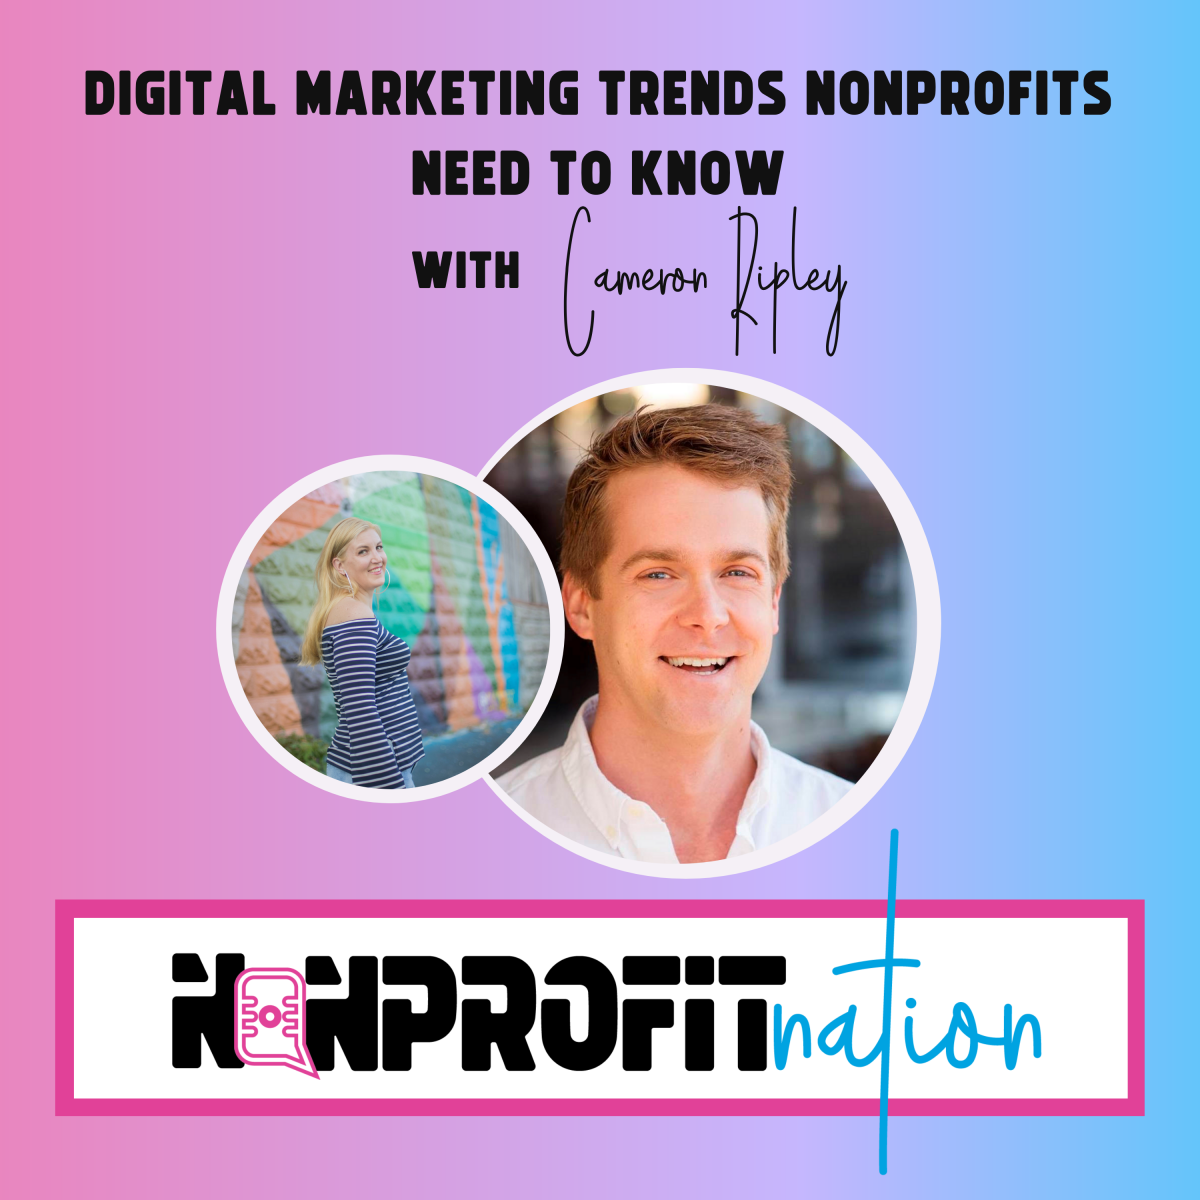 Digital Marketing Trends Nonprofits Need To Know with Cameron Ripley